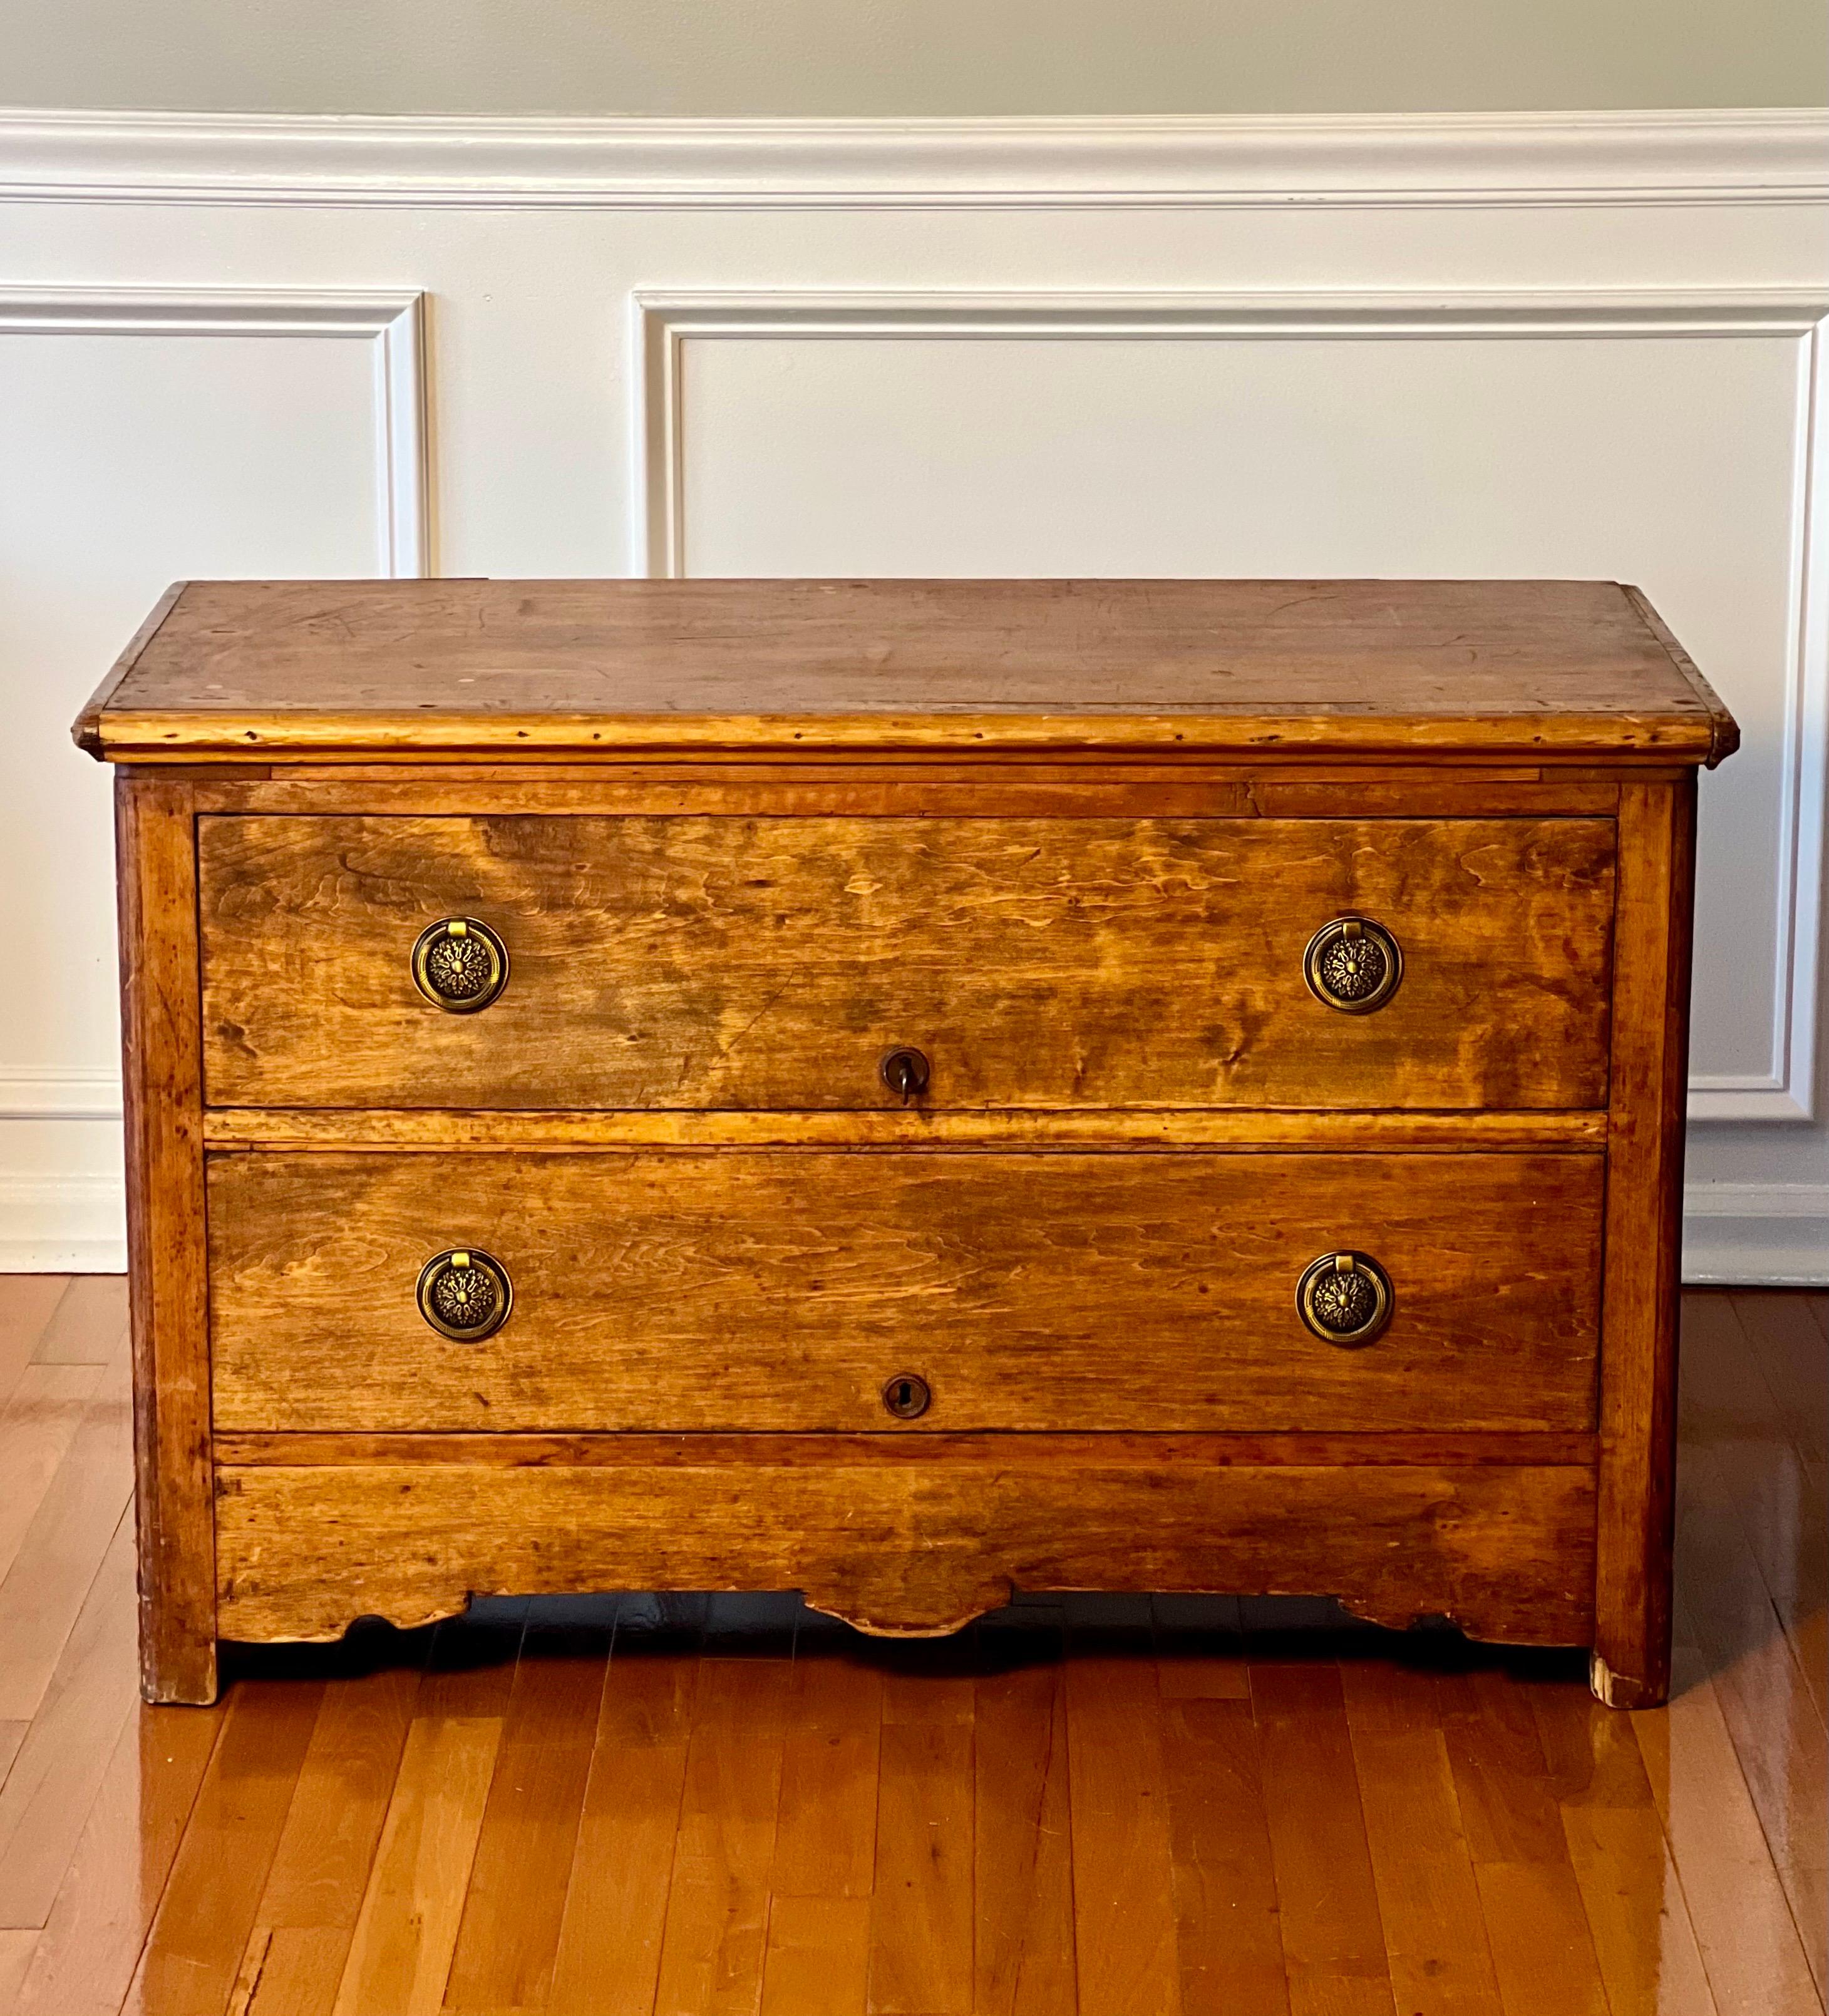 Antique American solid pine blanket chest, c. mid 19th century.

The chest features two faux drawers and a flat, hinged lift top with a large interior cabin. The pine has great patina with lots of warmth and dimension. It shows signs of age in a